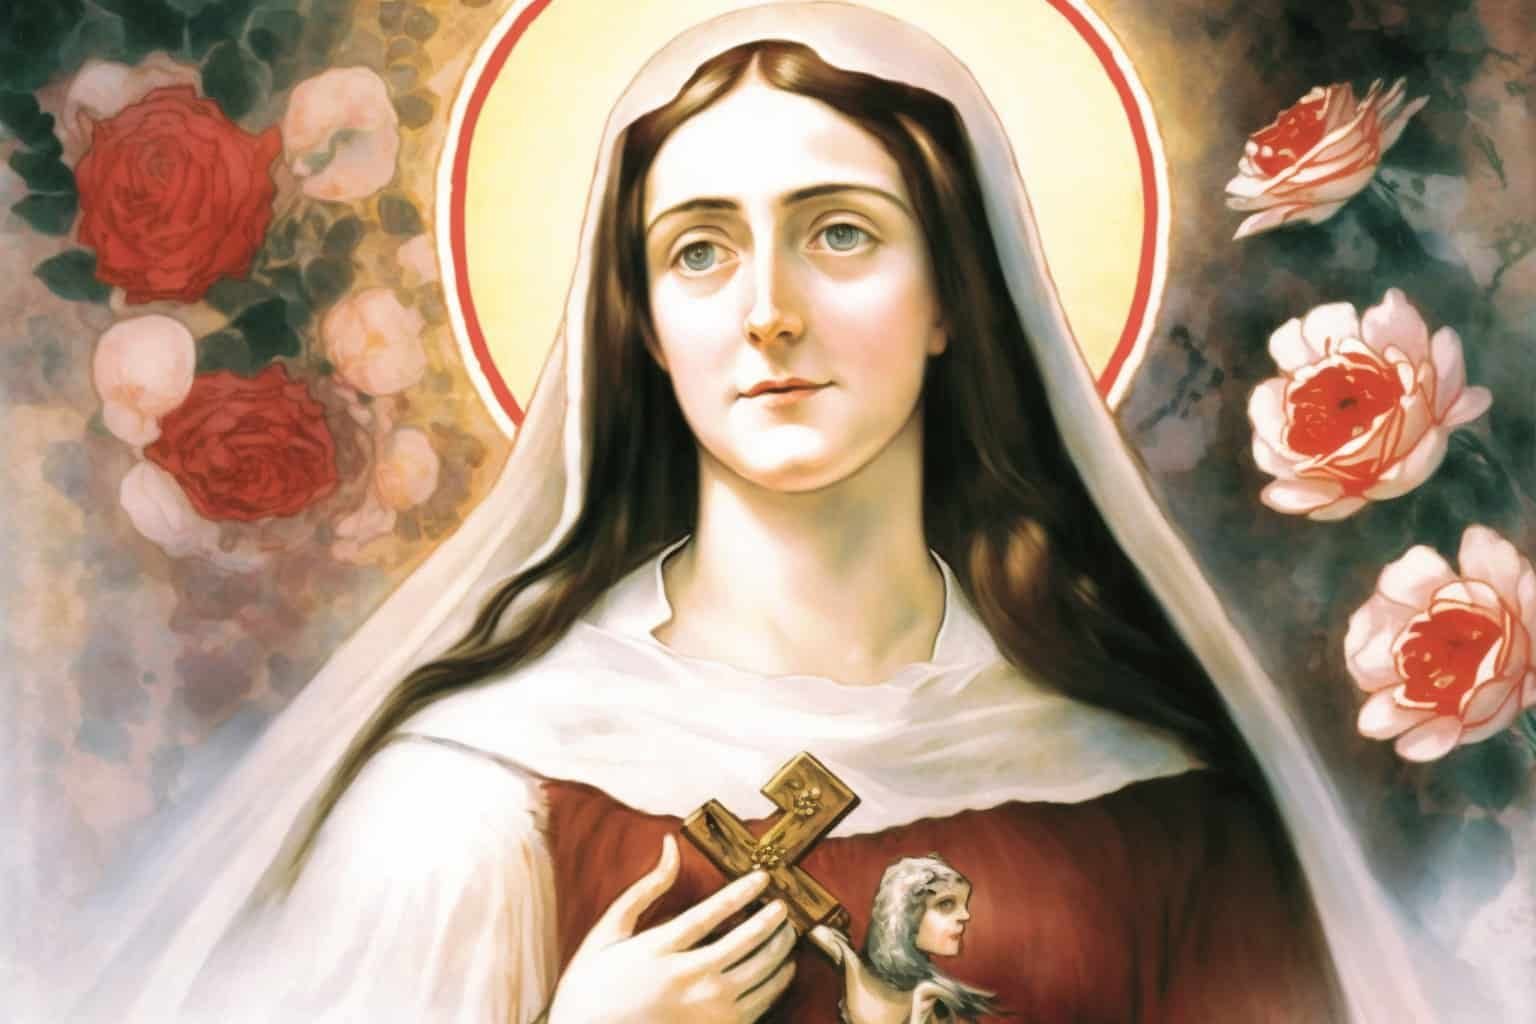 St. Therese image